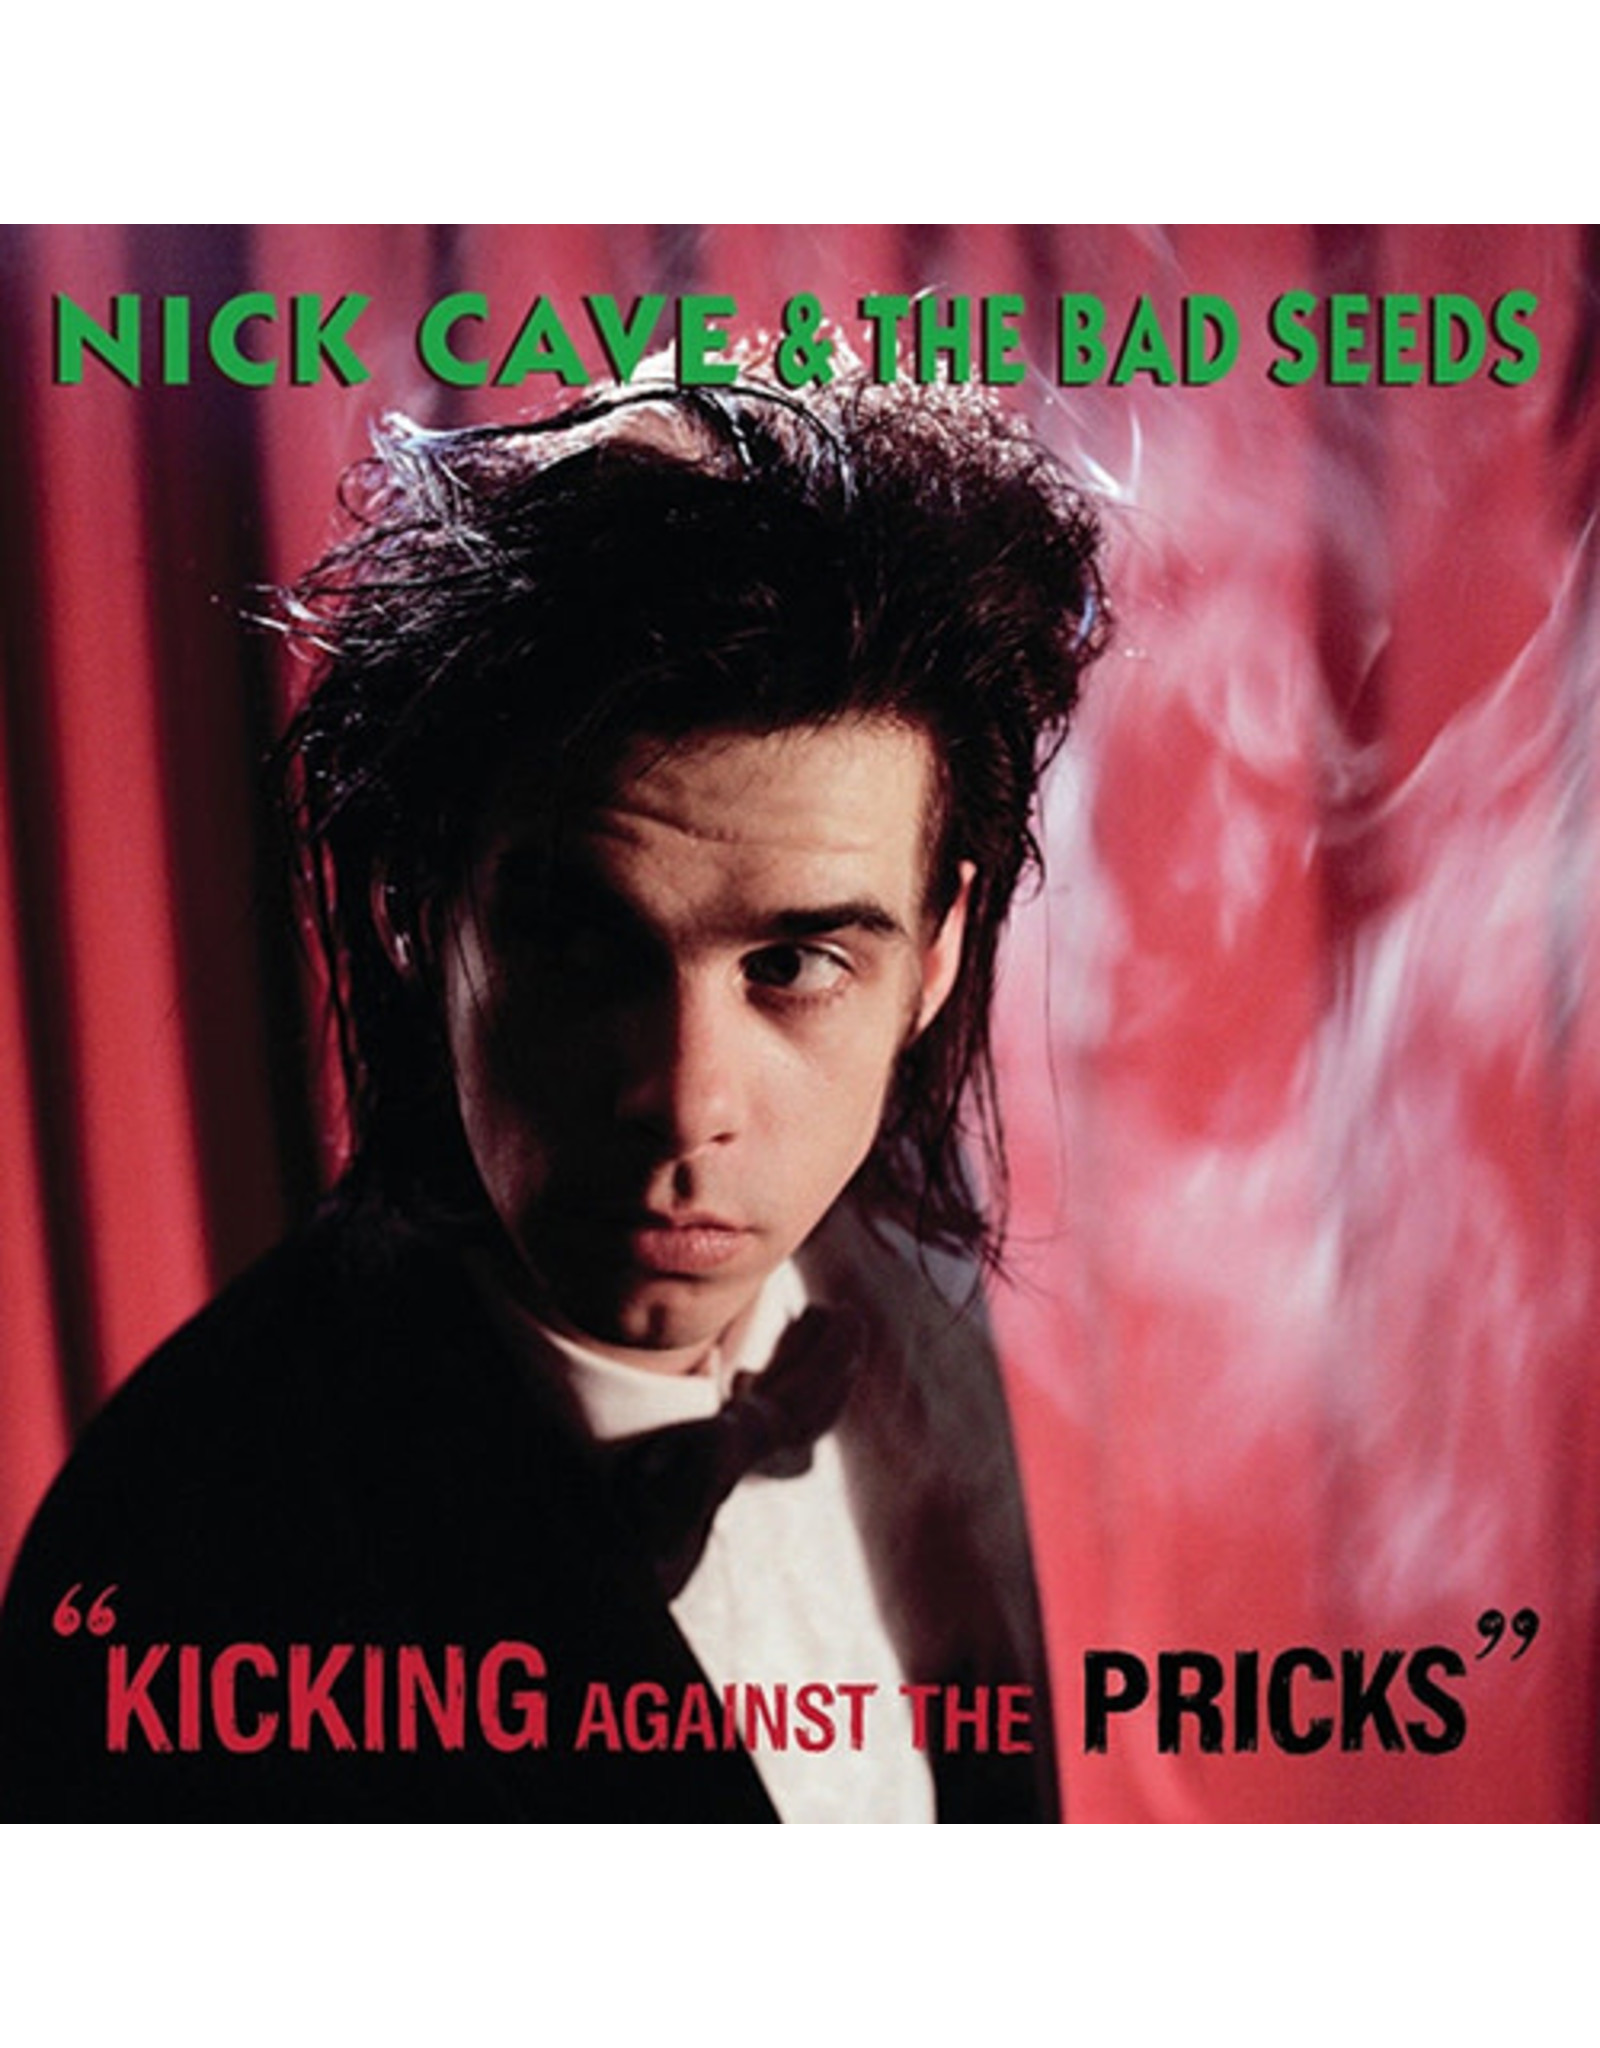 Mute Cave, Nick & The Bad Seeds: Kicking Against the Pricks LP